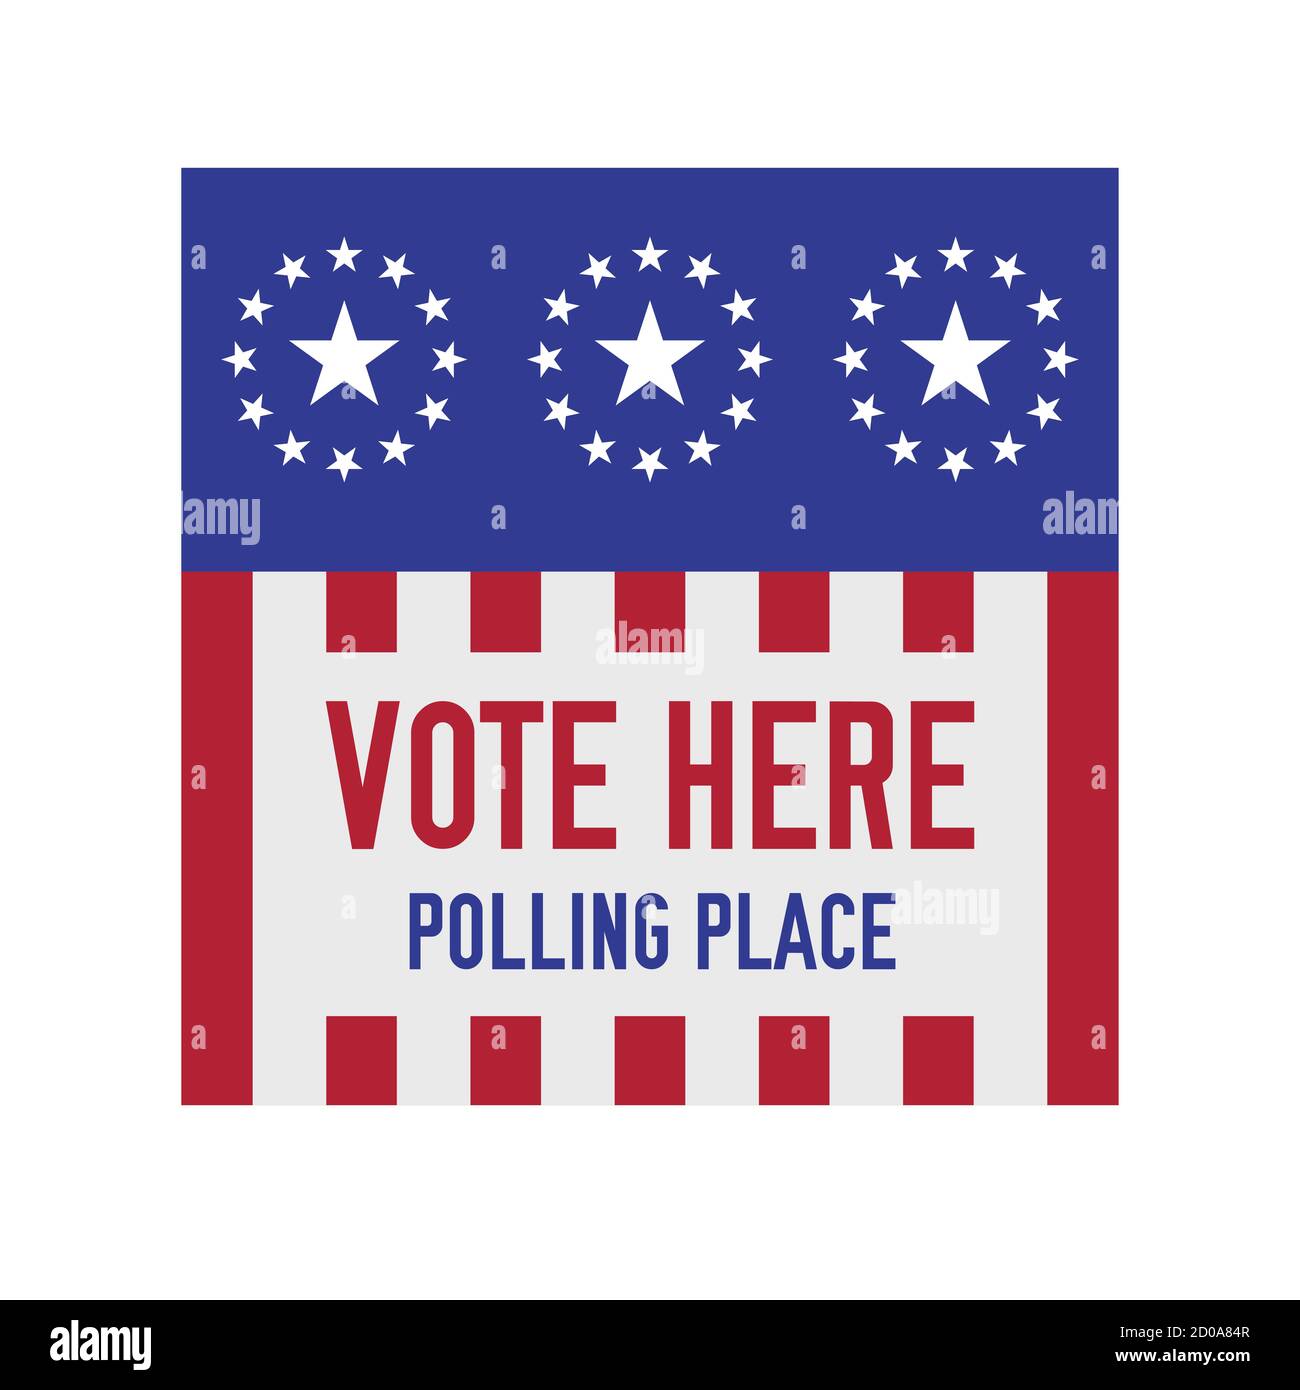 VOTE HERE. Polling place sign. 2020 United States presidential election. illustration. Stock Photo